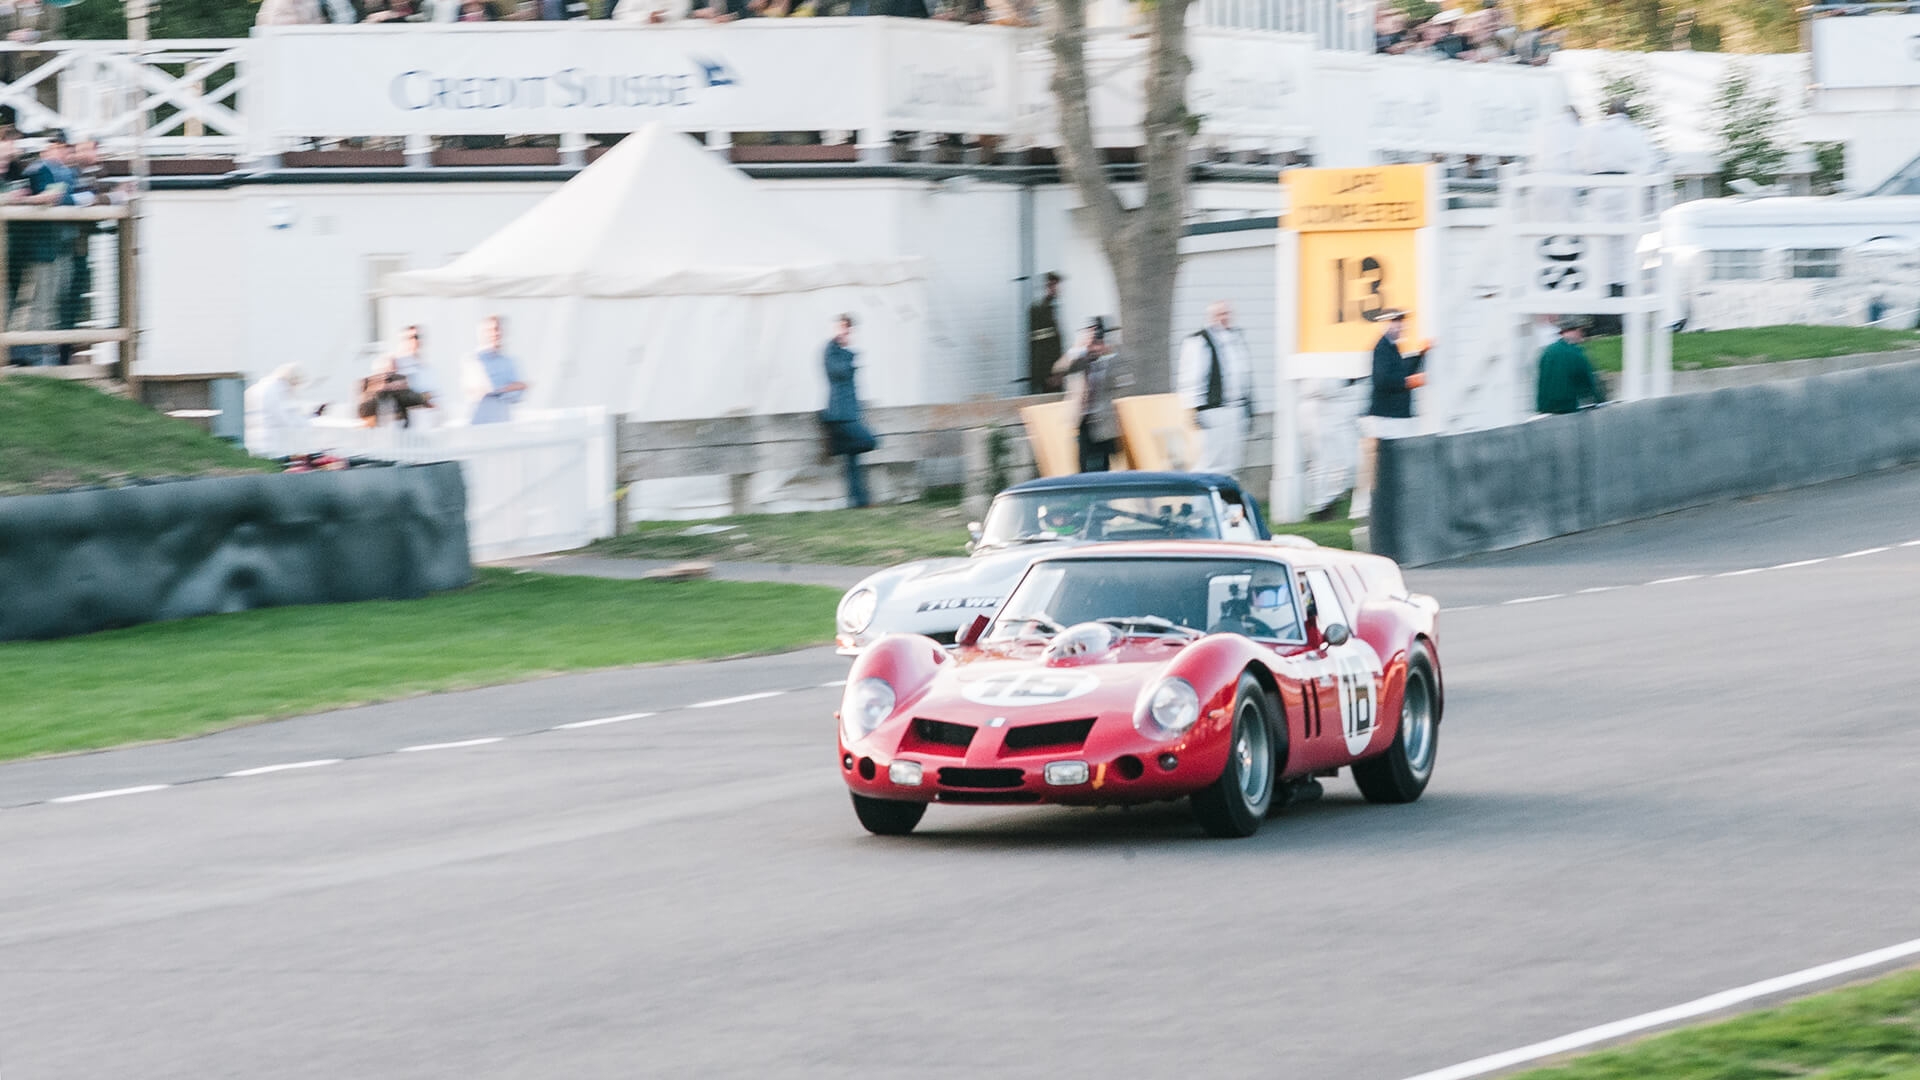 Goodwood celebrates its 20th Revival: The action starts here!